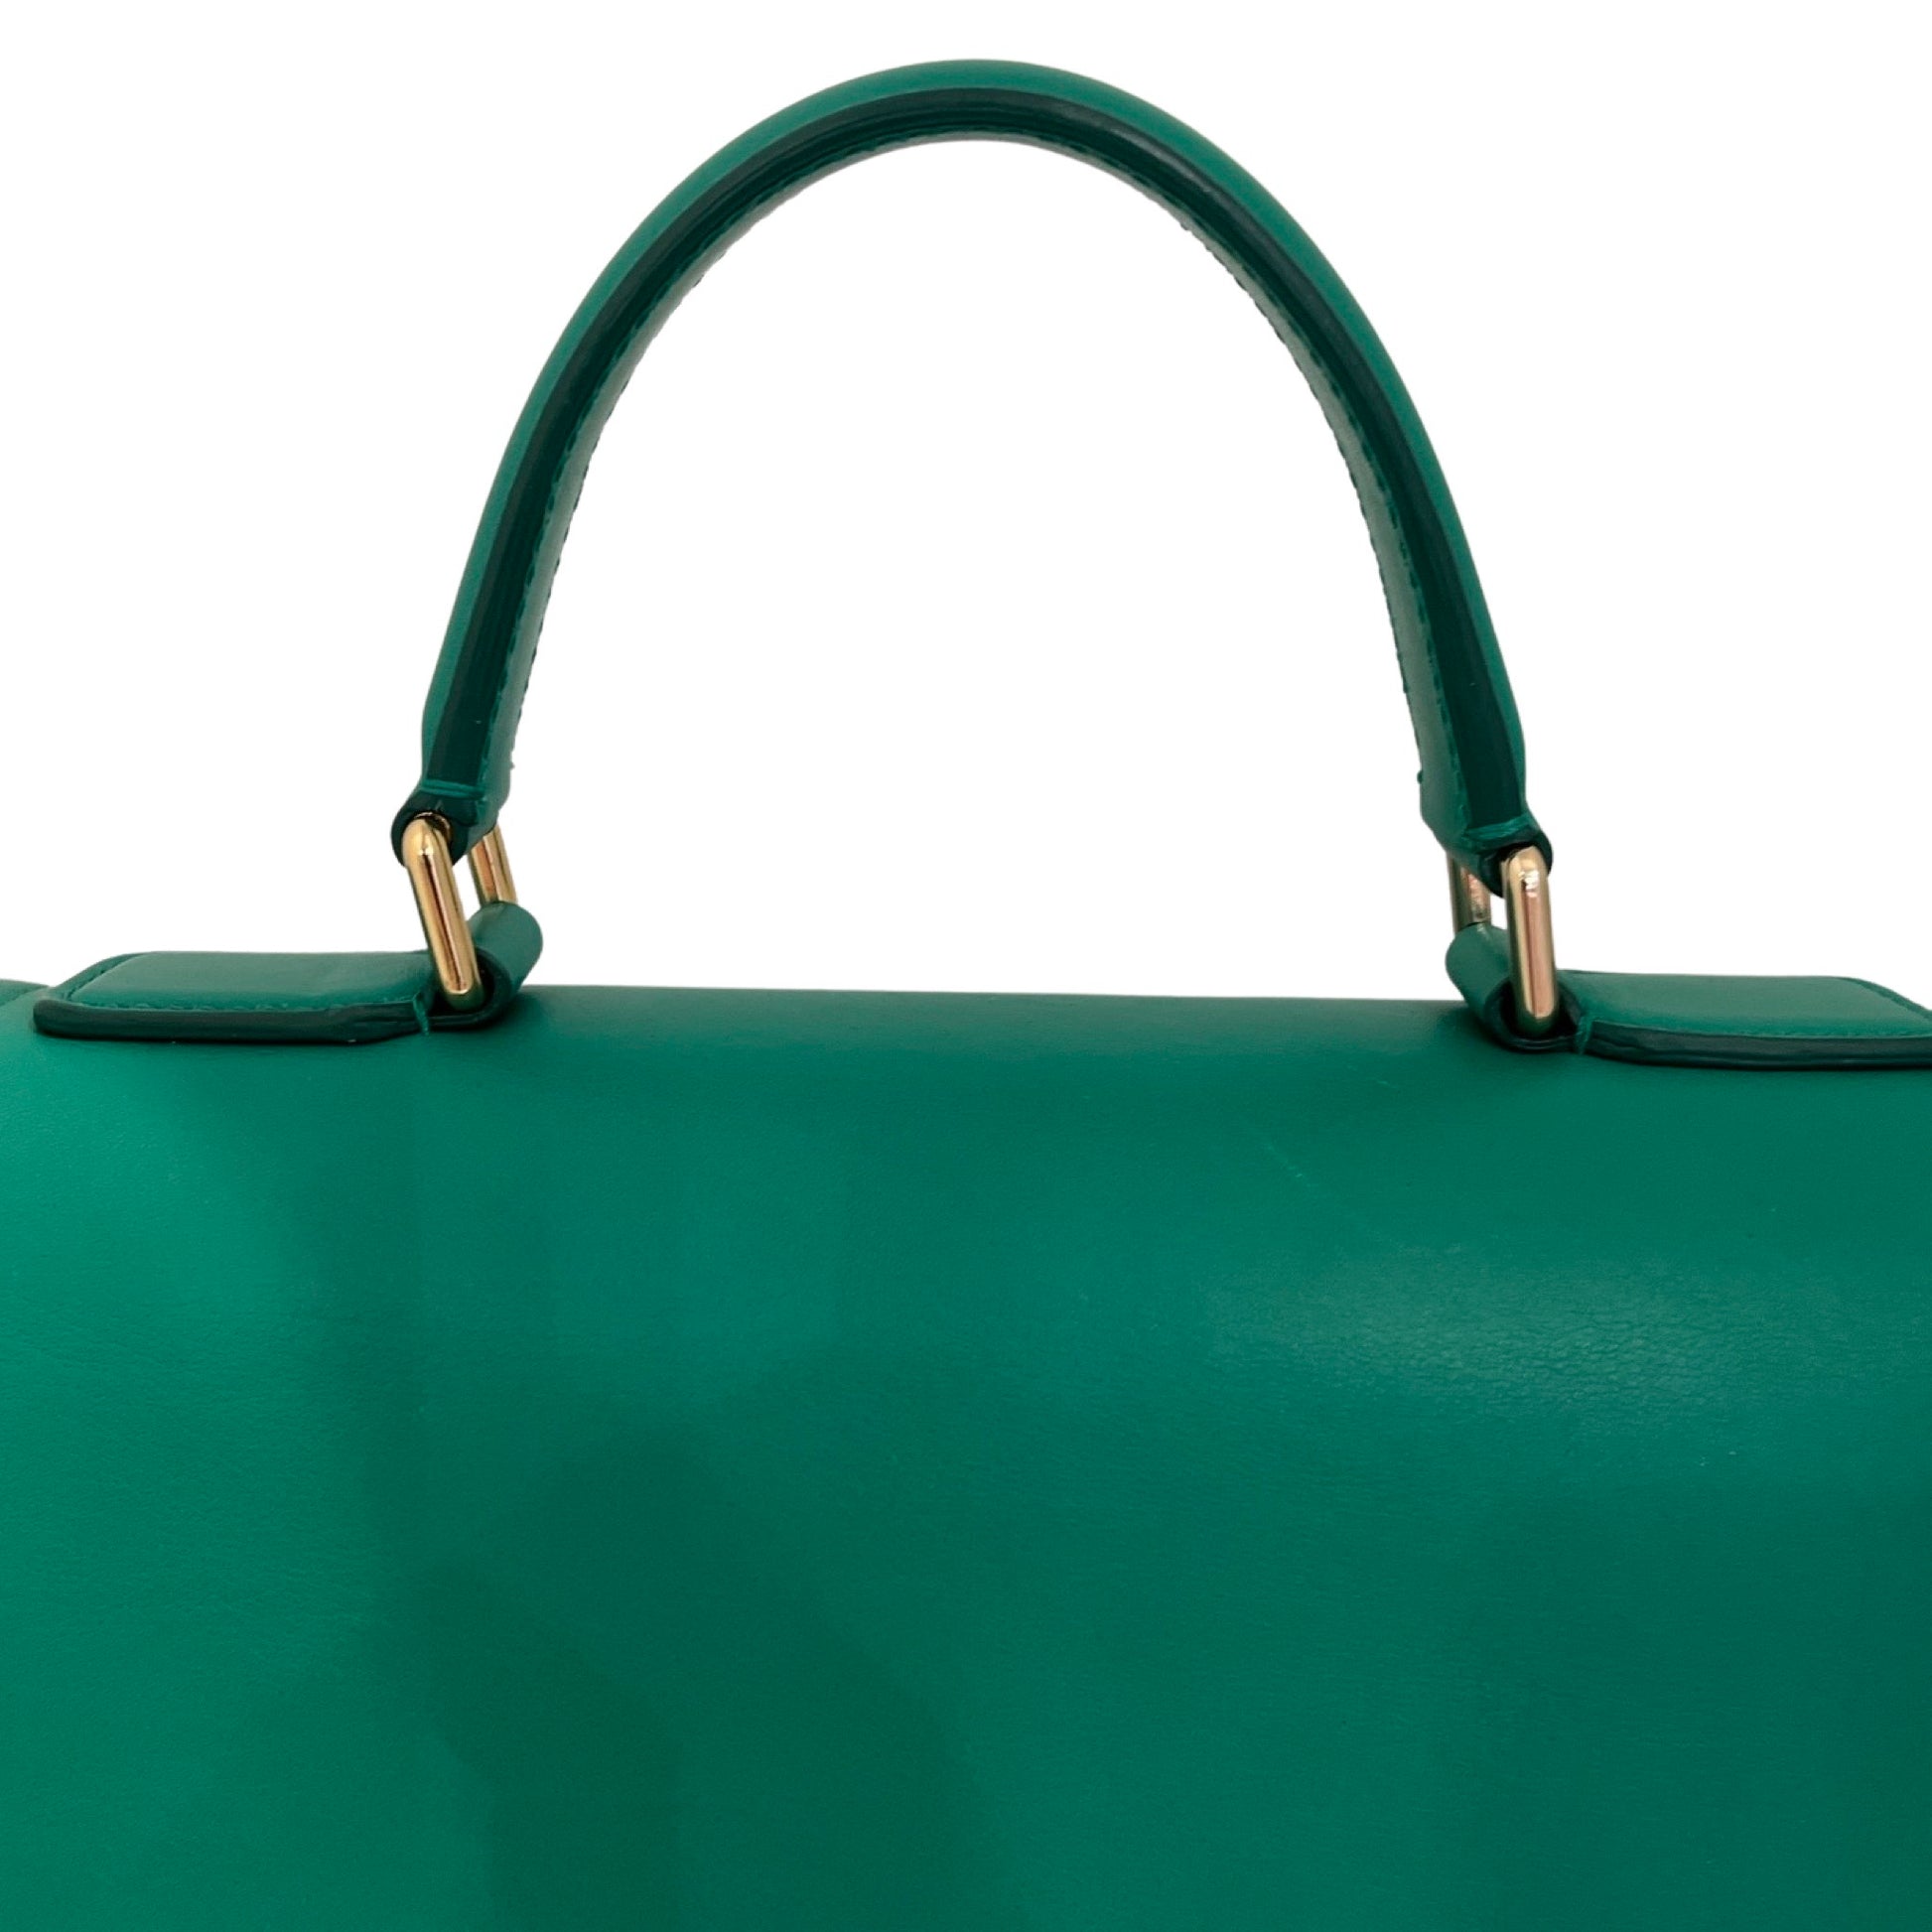 Dolce & Gabbana Large 'sicily' Tote in Green